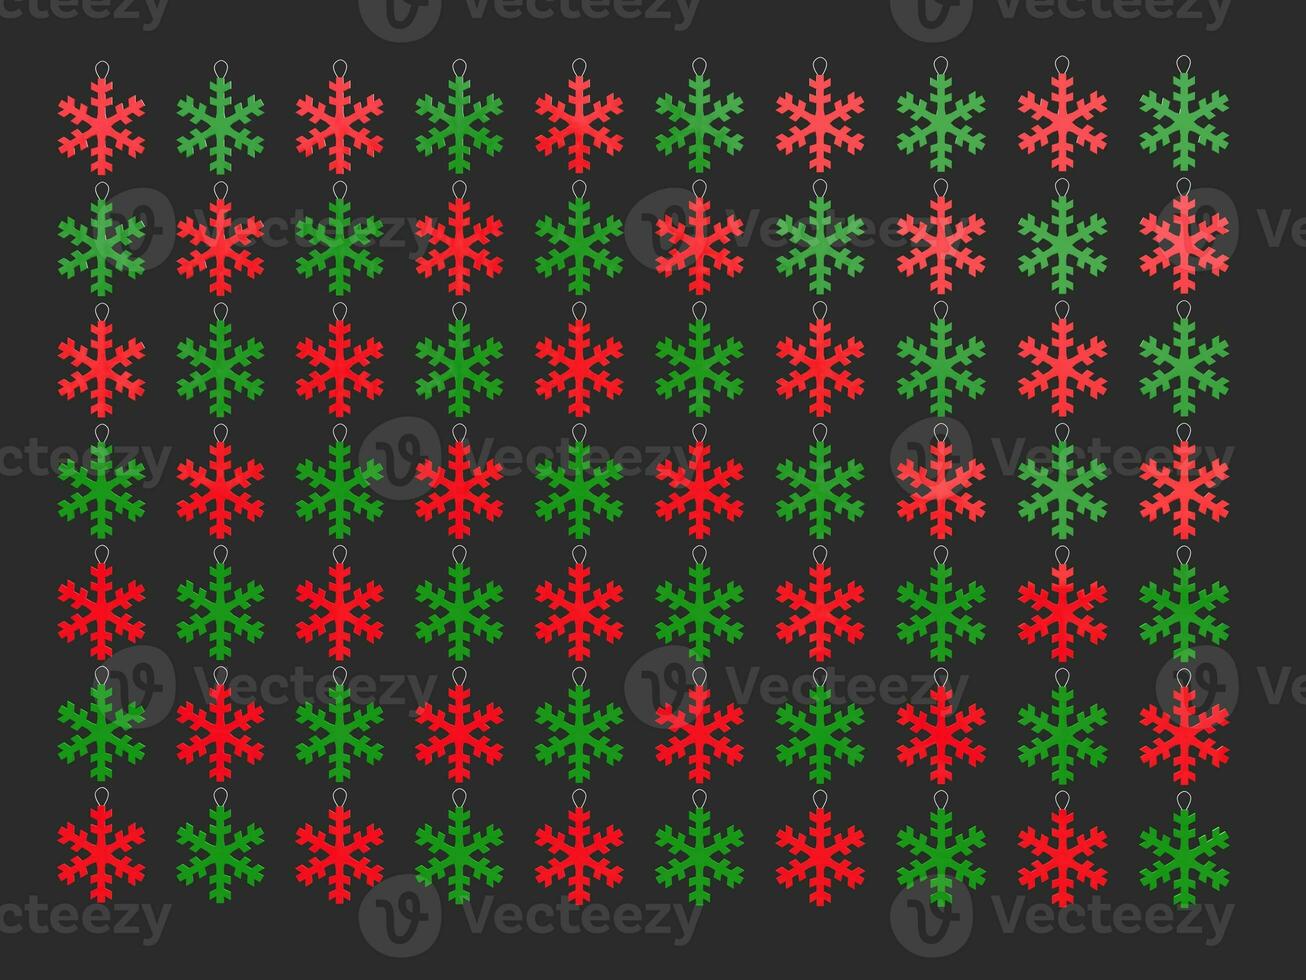 Red and green snowflake Christmas tree decorations - dark gray background photo